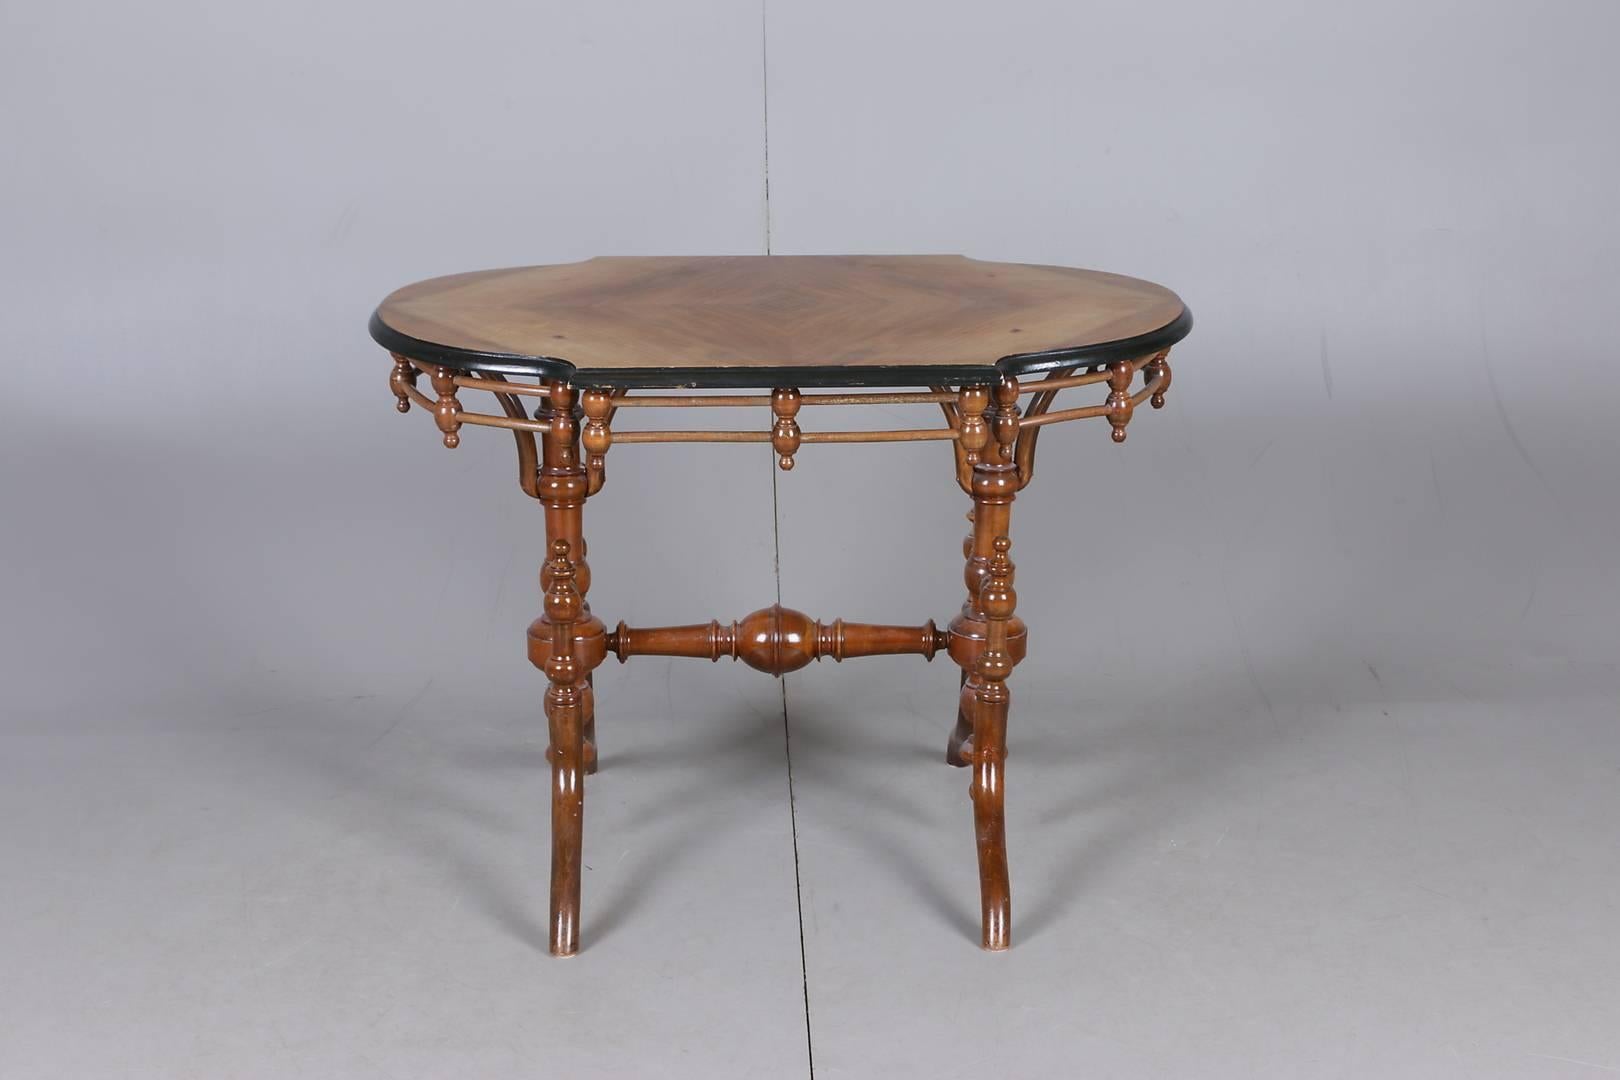 Playful walnut construction with turned and curved parts, made in Germany, circa 1870s.